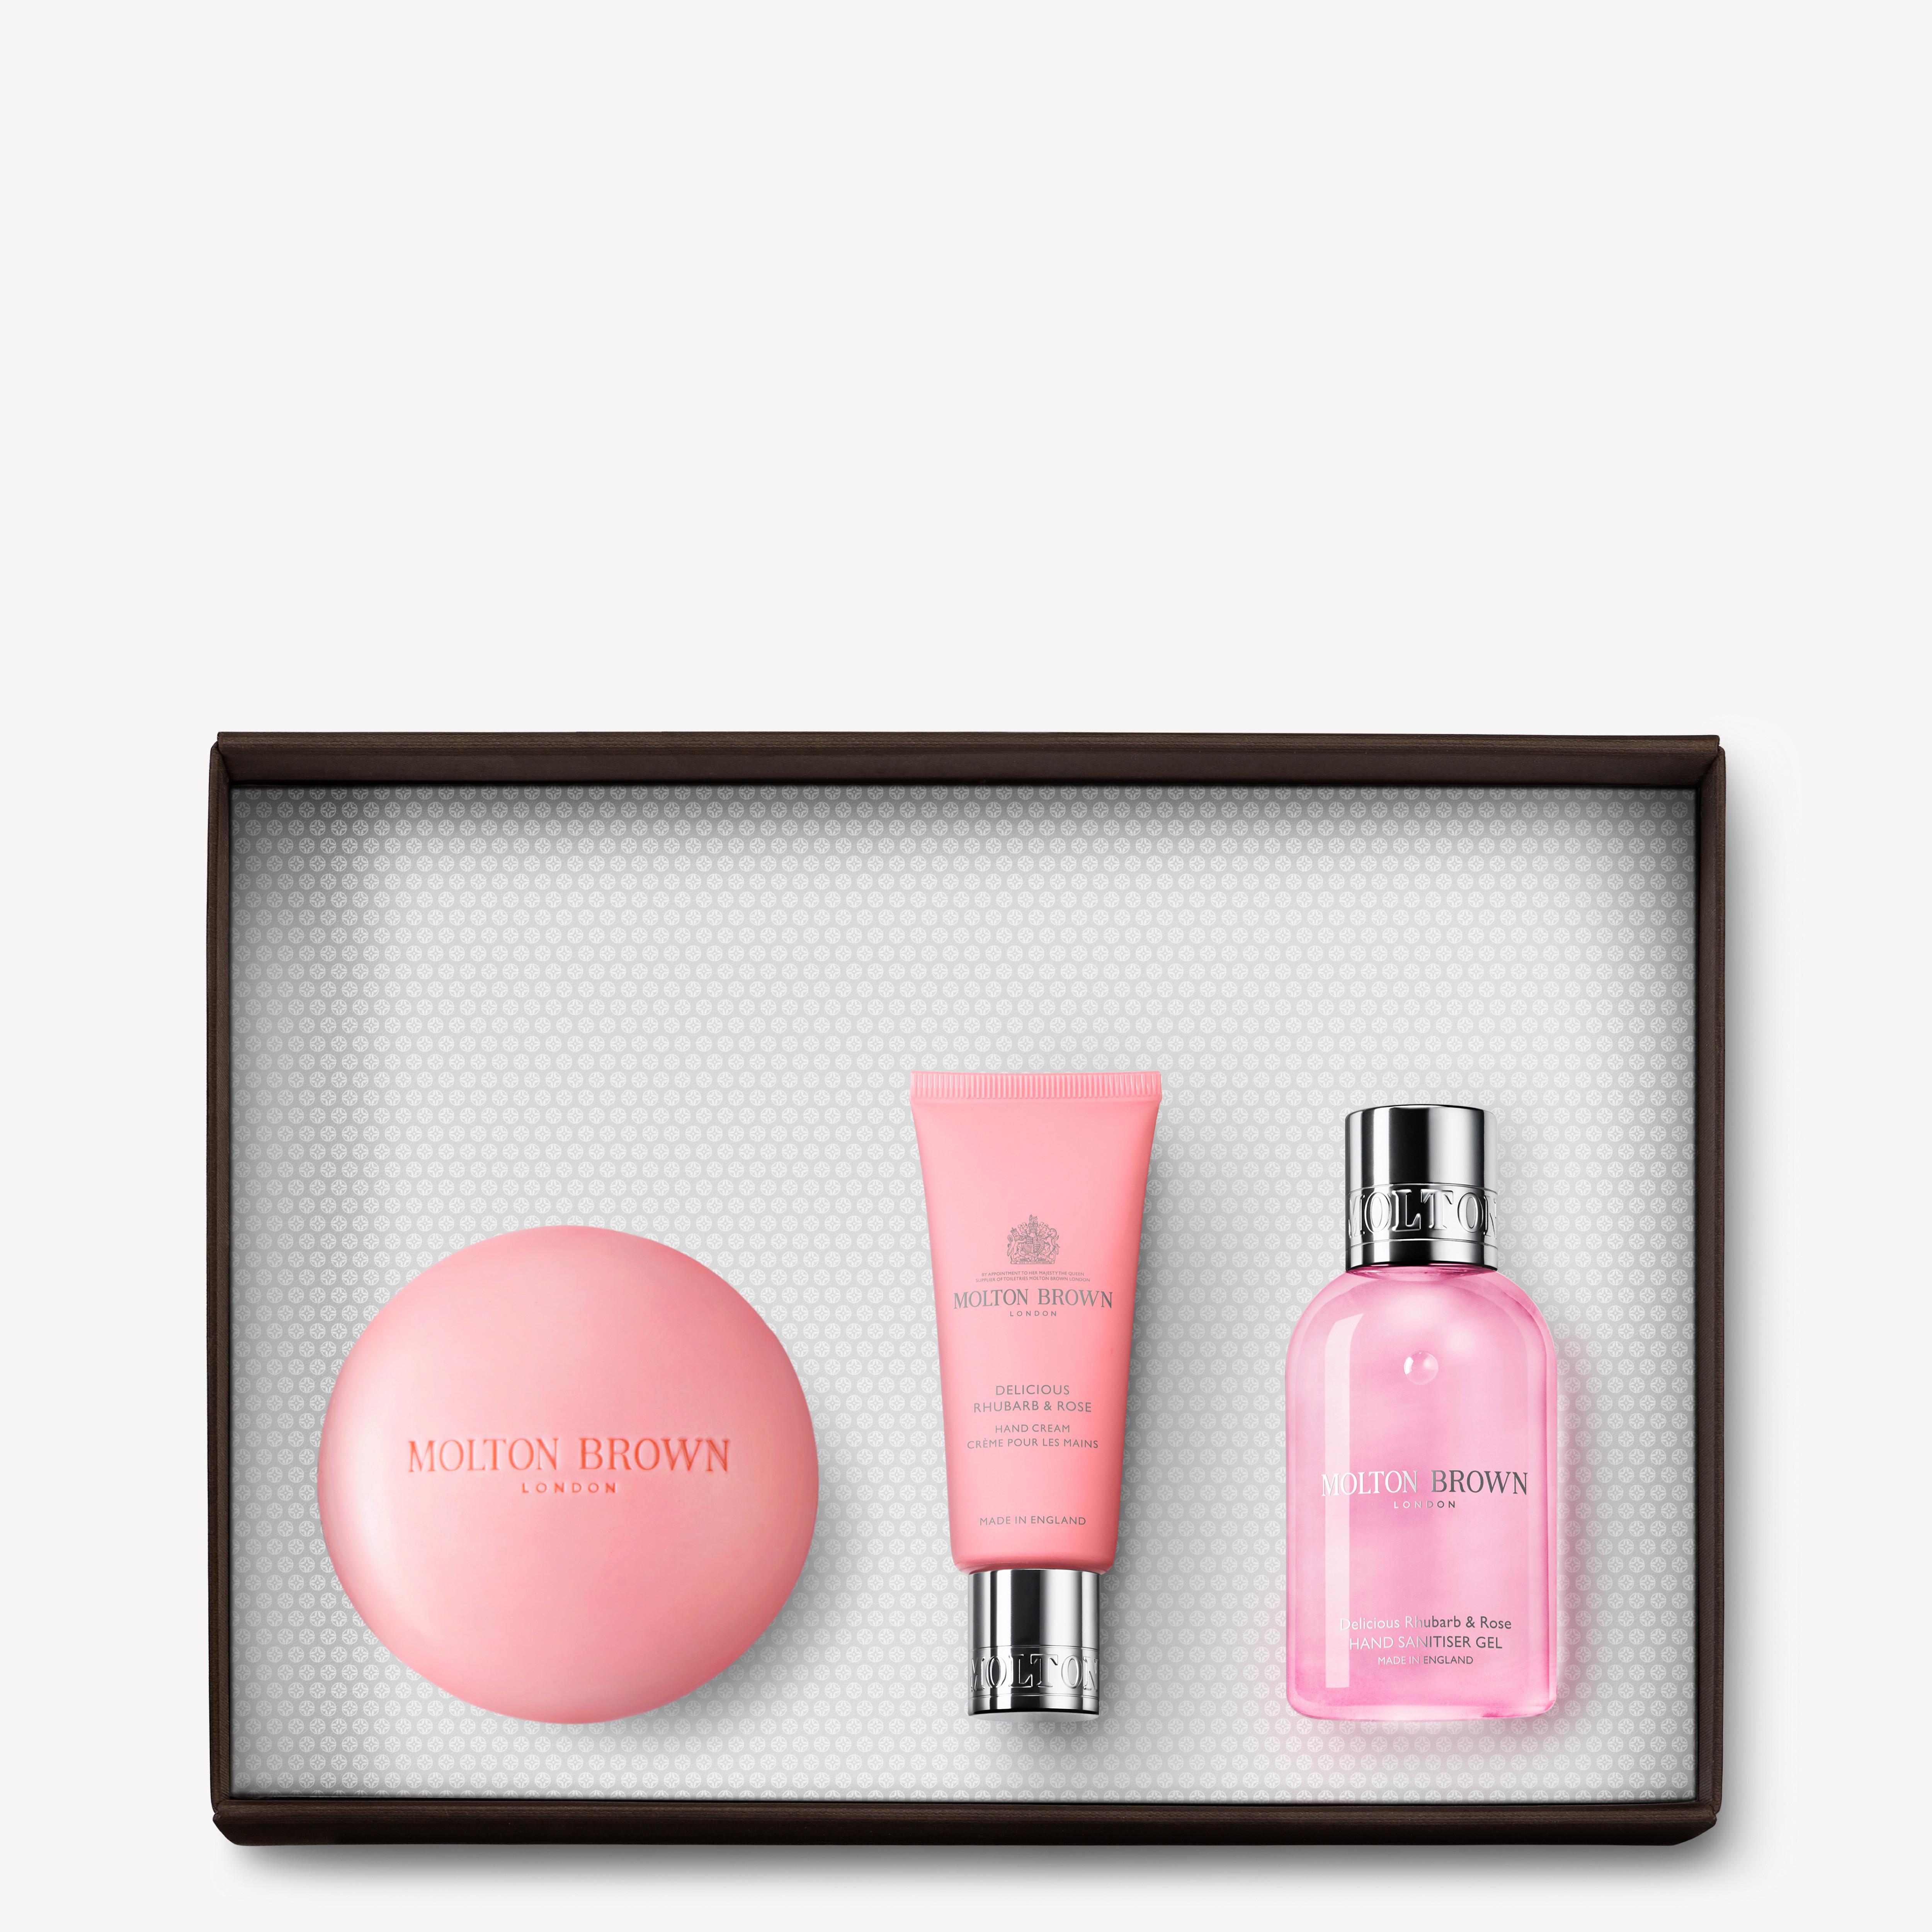 Molton Brown Delicious Rhubarb & Rose Travel Hand Care Gift Set